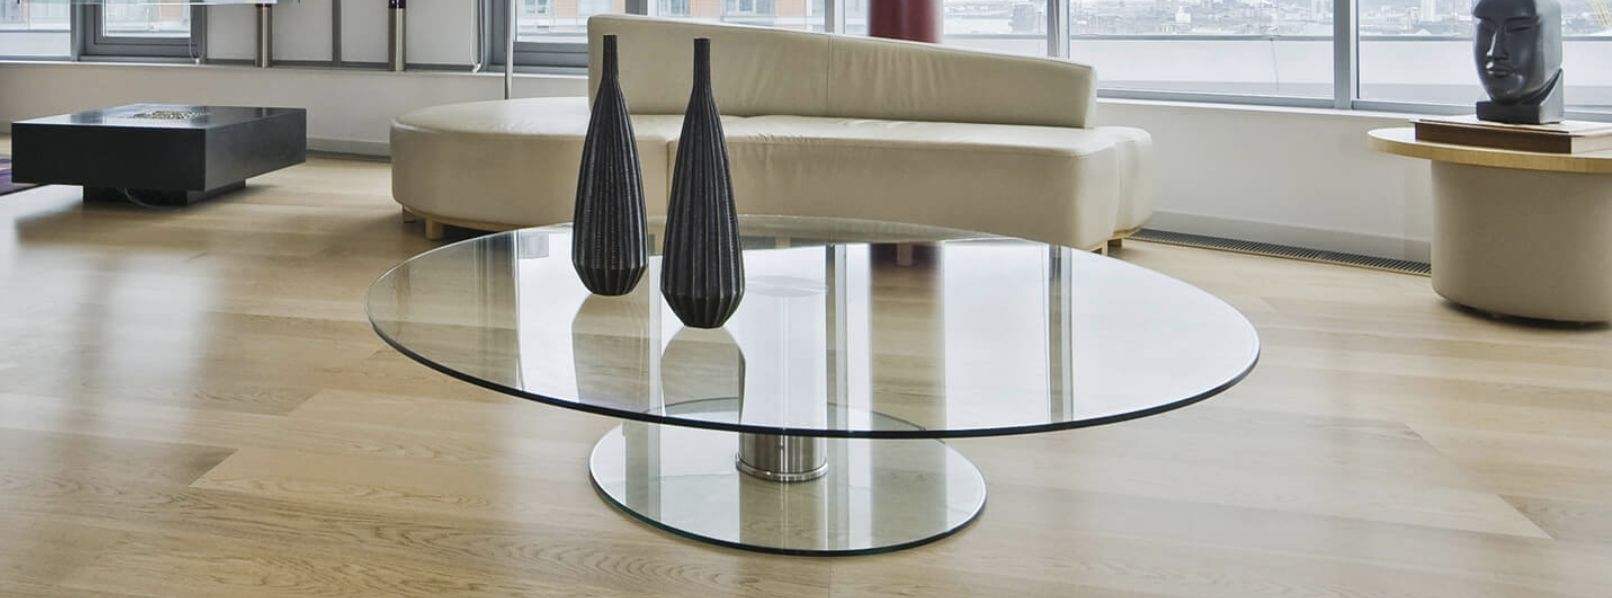 Apollo Glass Offers Customized Glass Tabletops – Apollo Glass Throughout Glass Tabletop Coffee Tables (View 11 of 15)